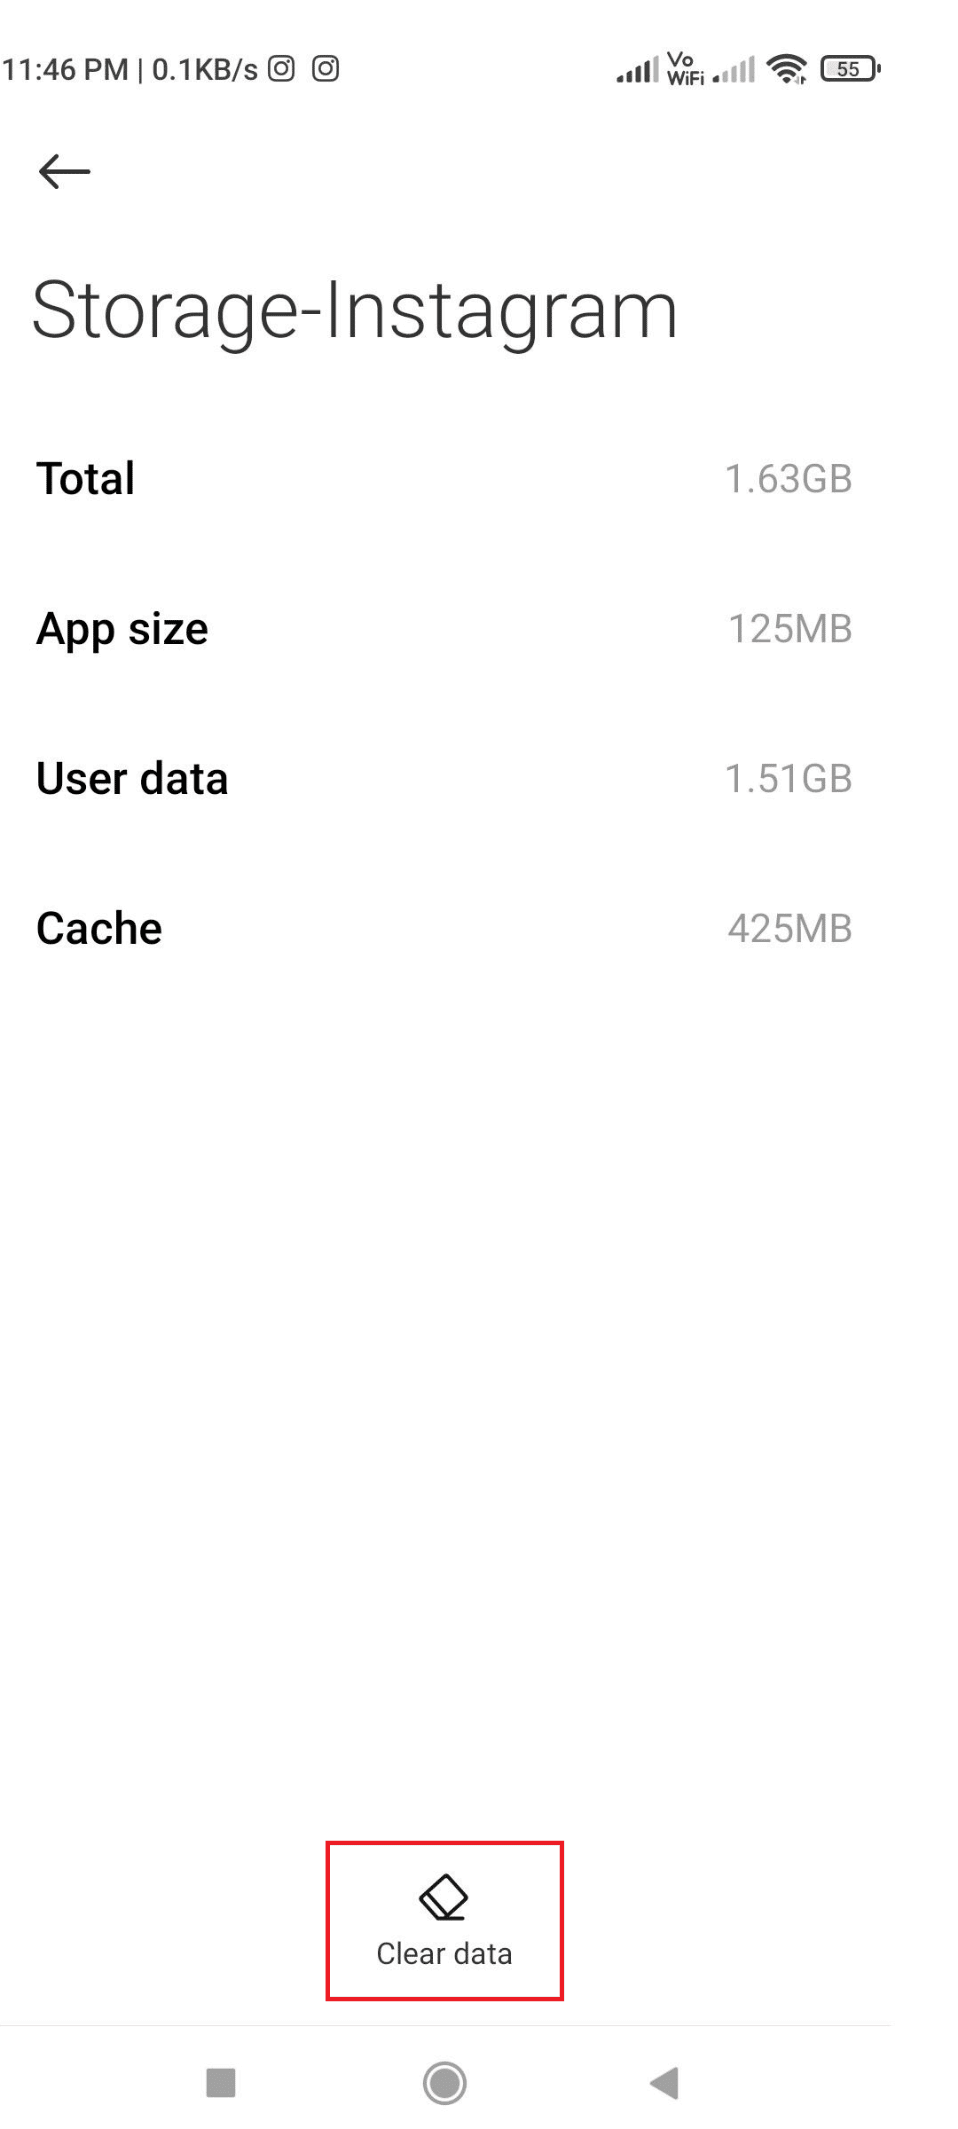 On the bottom of the Storage-Instagram page, tap on Clear data.